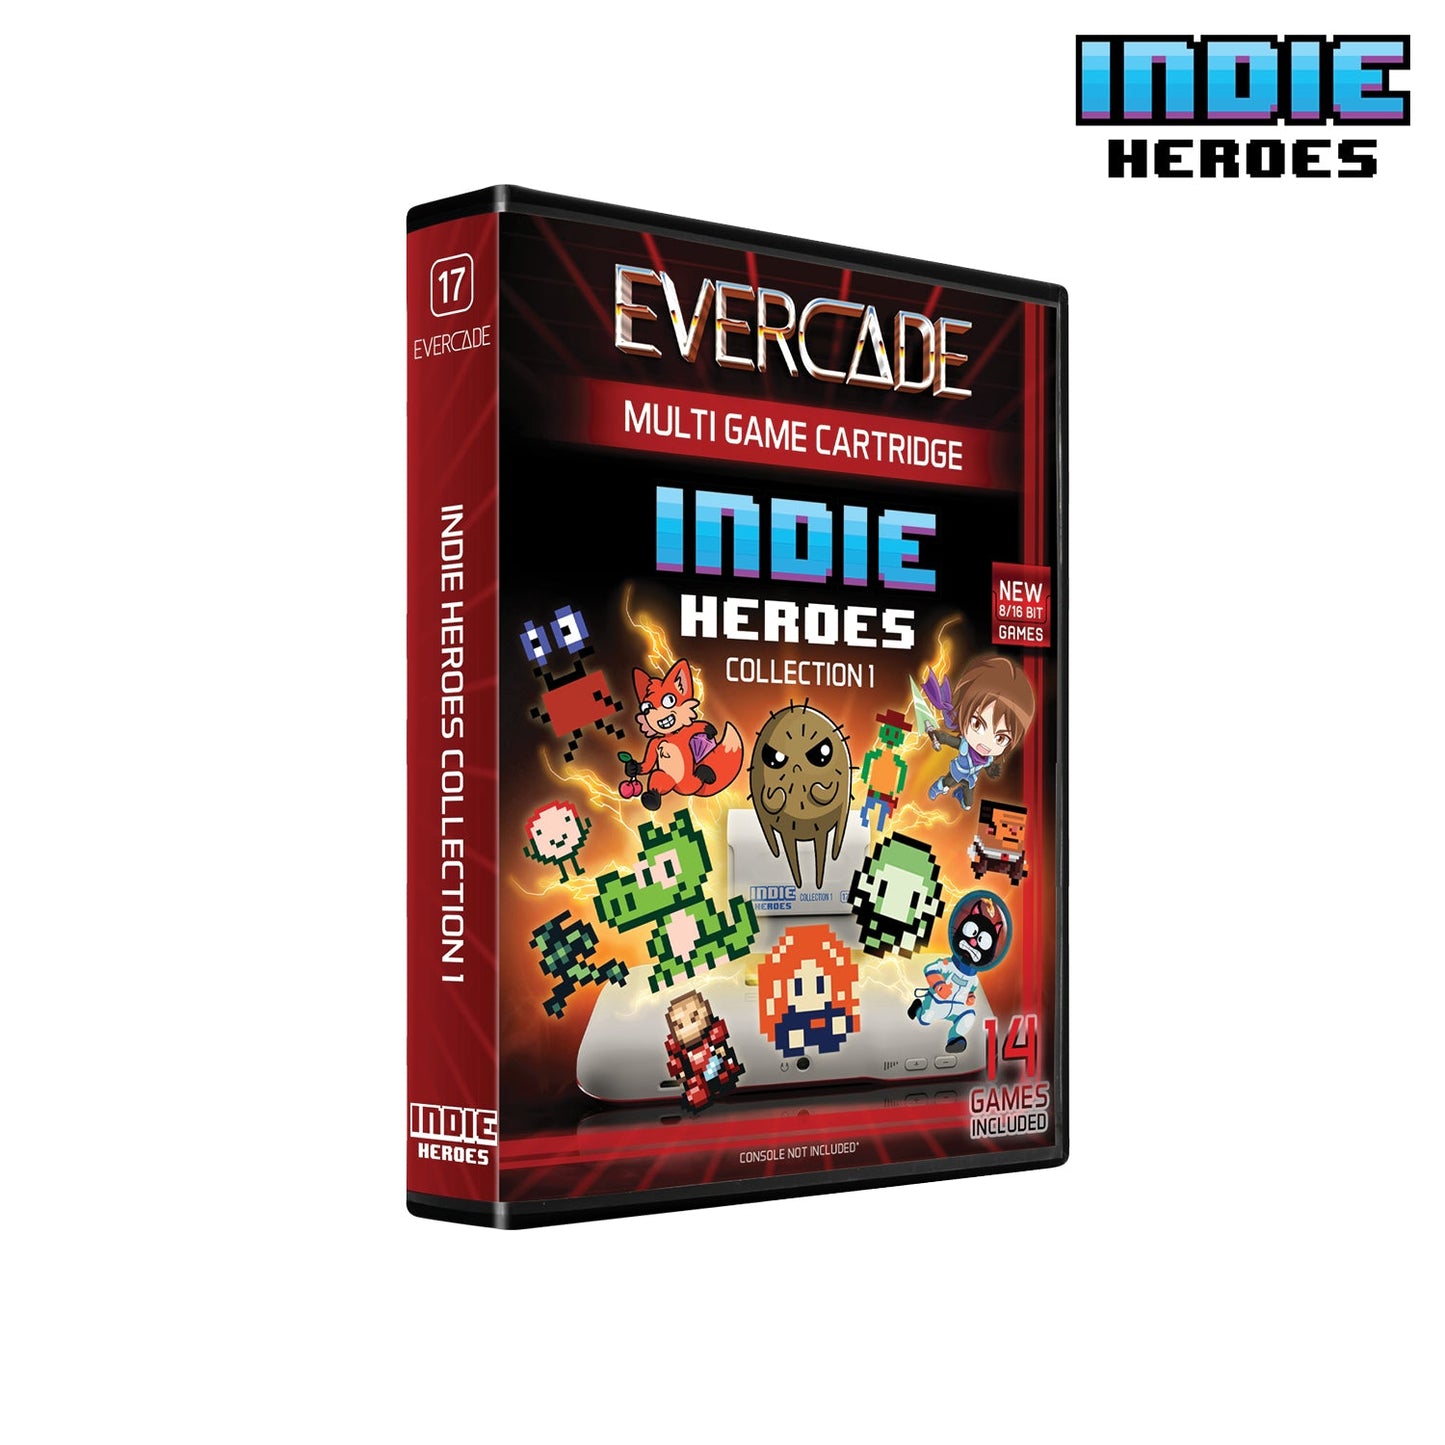 Evercade Indie Heroes Collection 1 - CastleMania Games